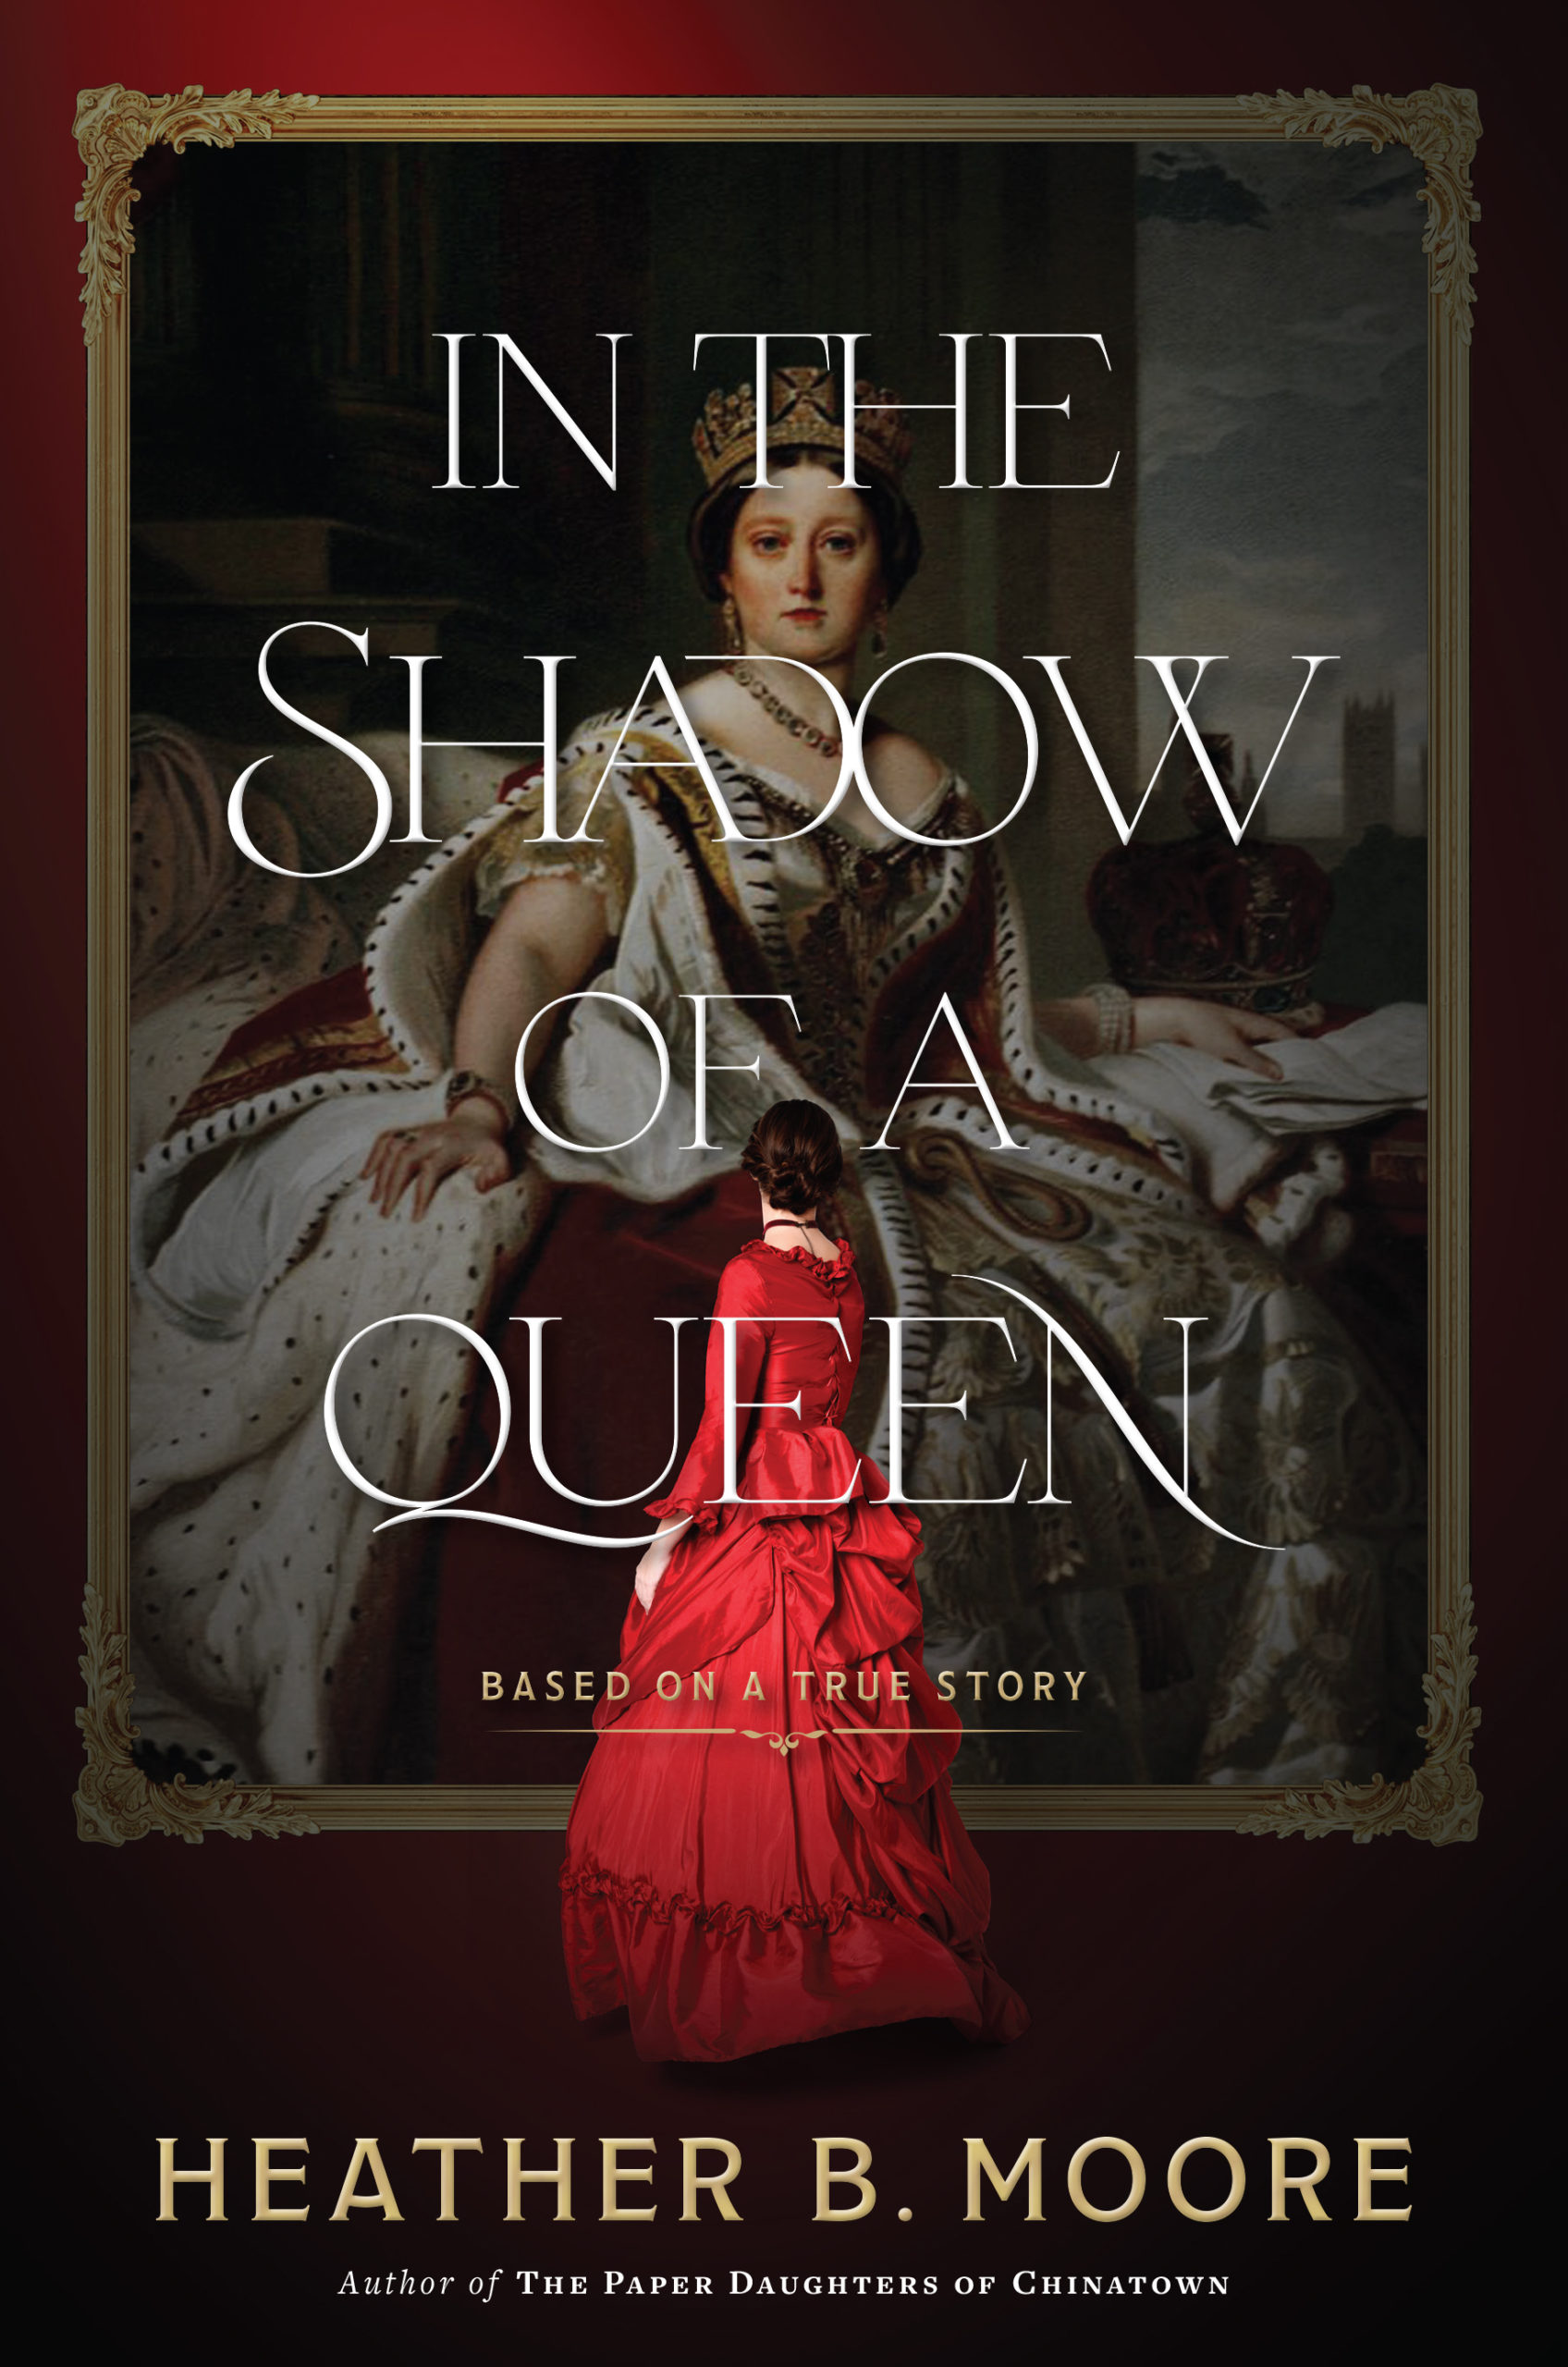 In the Shadow of the Queen by Heather B. Moore